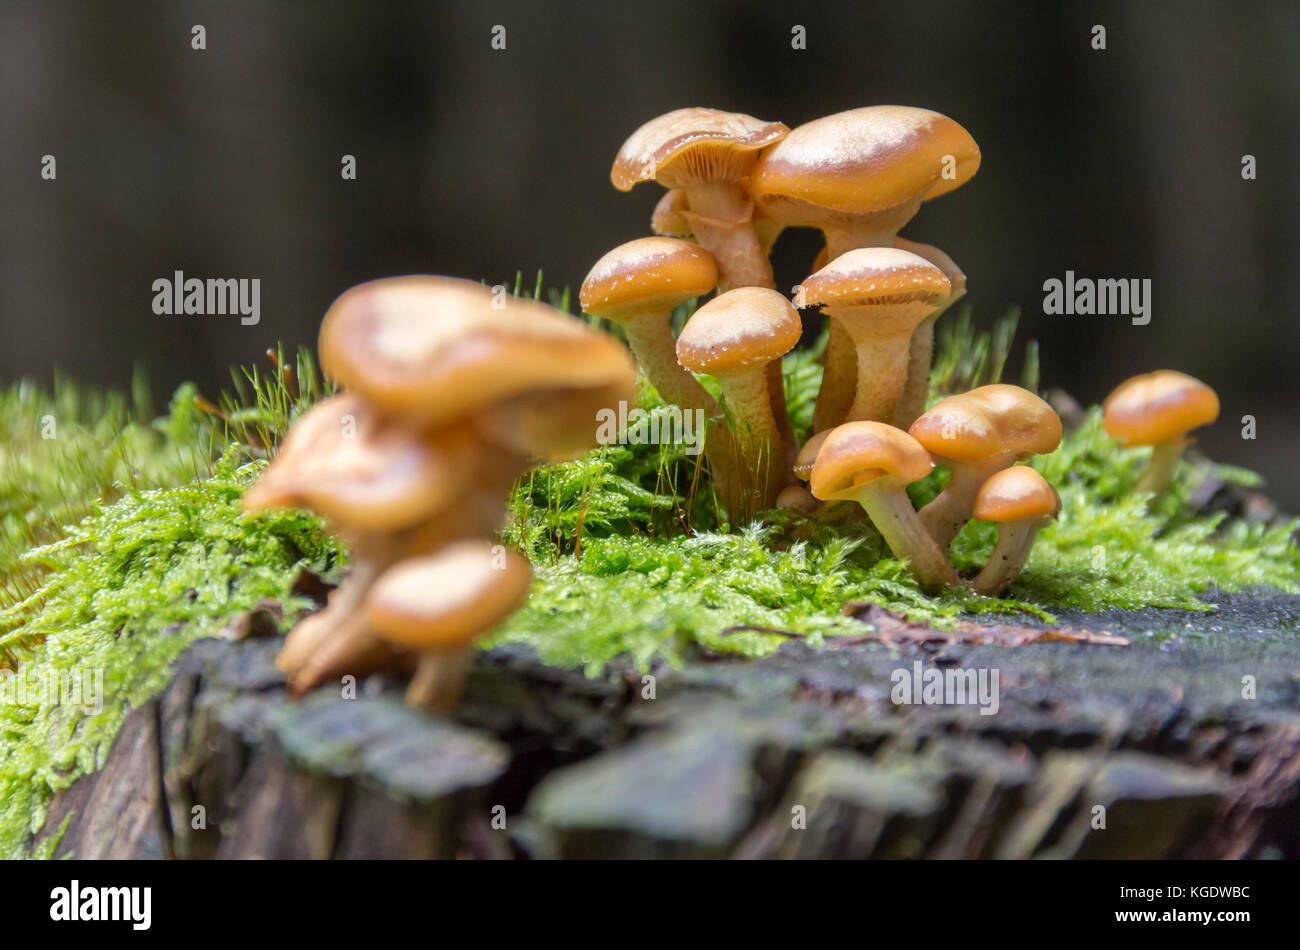 low angle shot showing groups of of mushrooms in forest ambiance Stock Photo